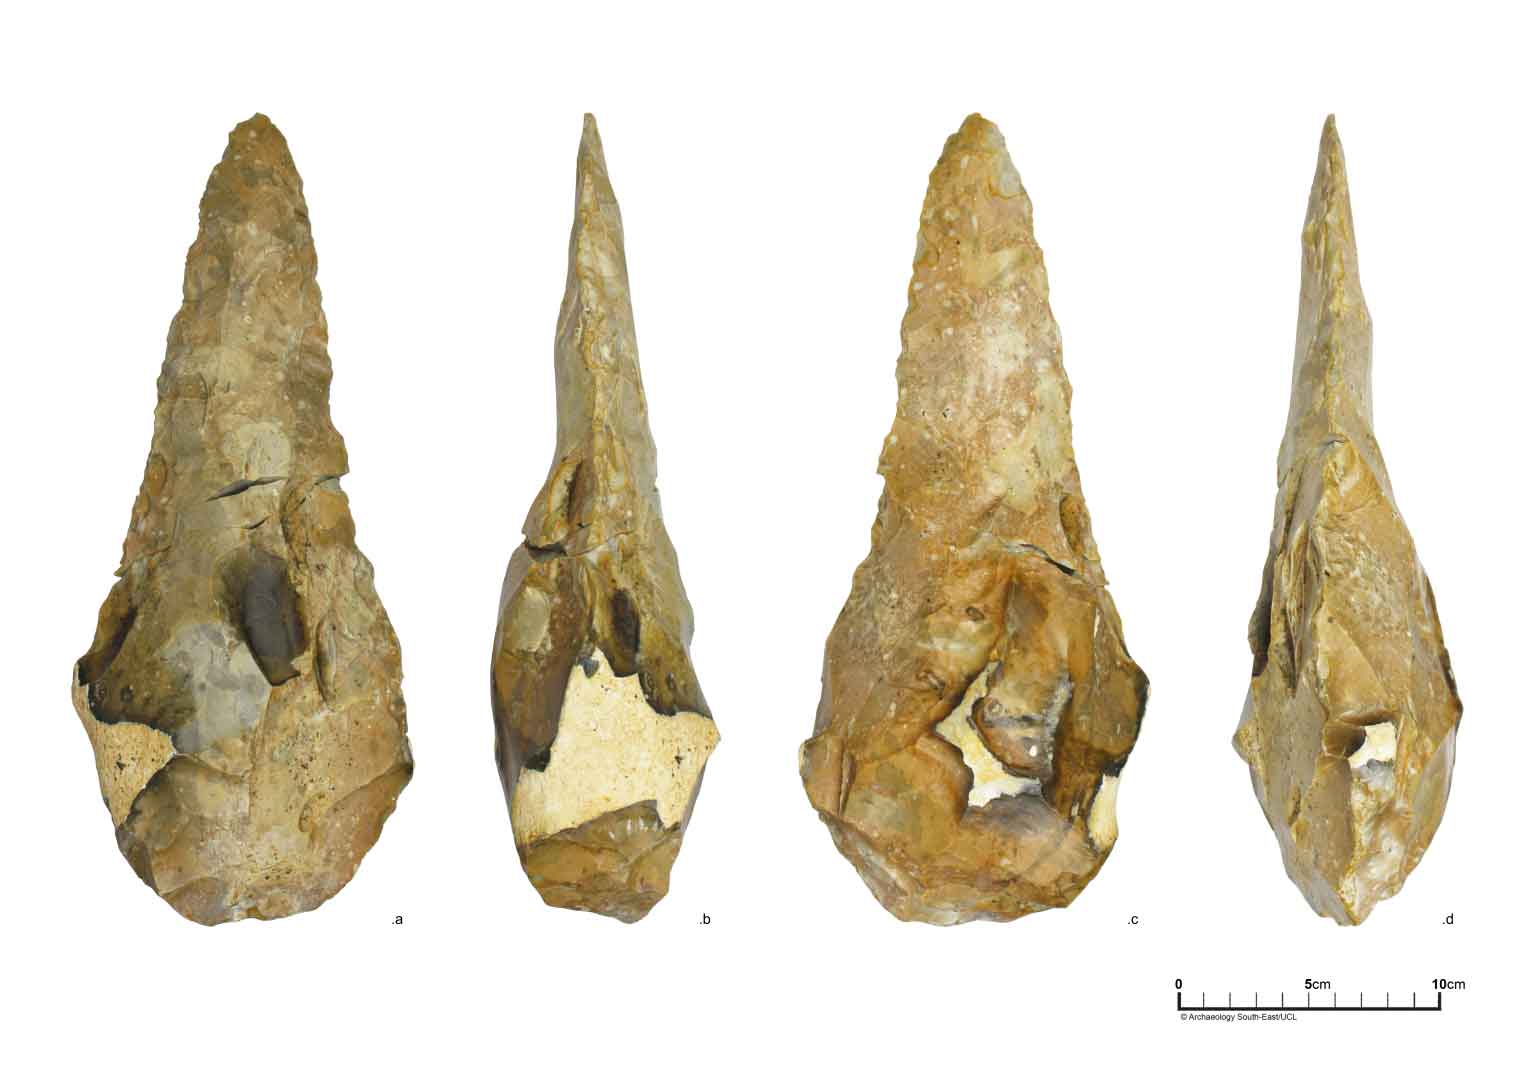 Four views of a large tan-colored handaxe with a very pointed end